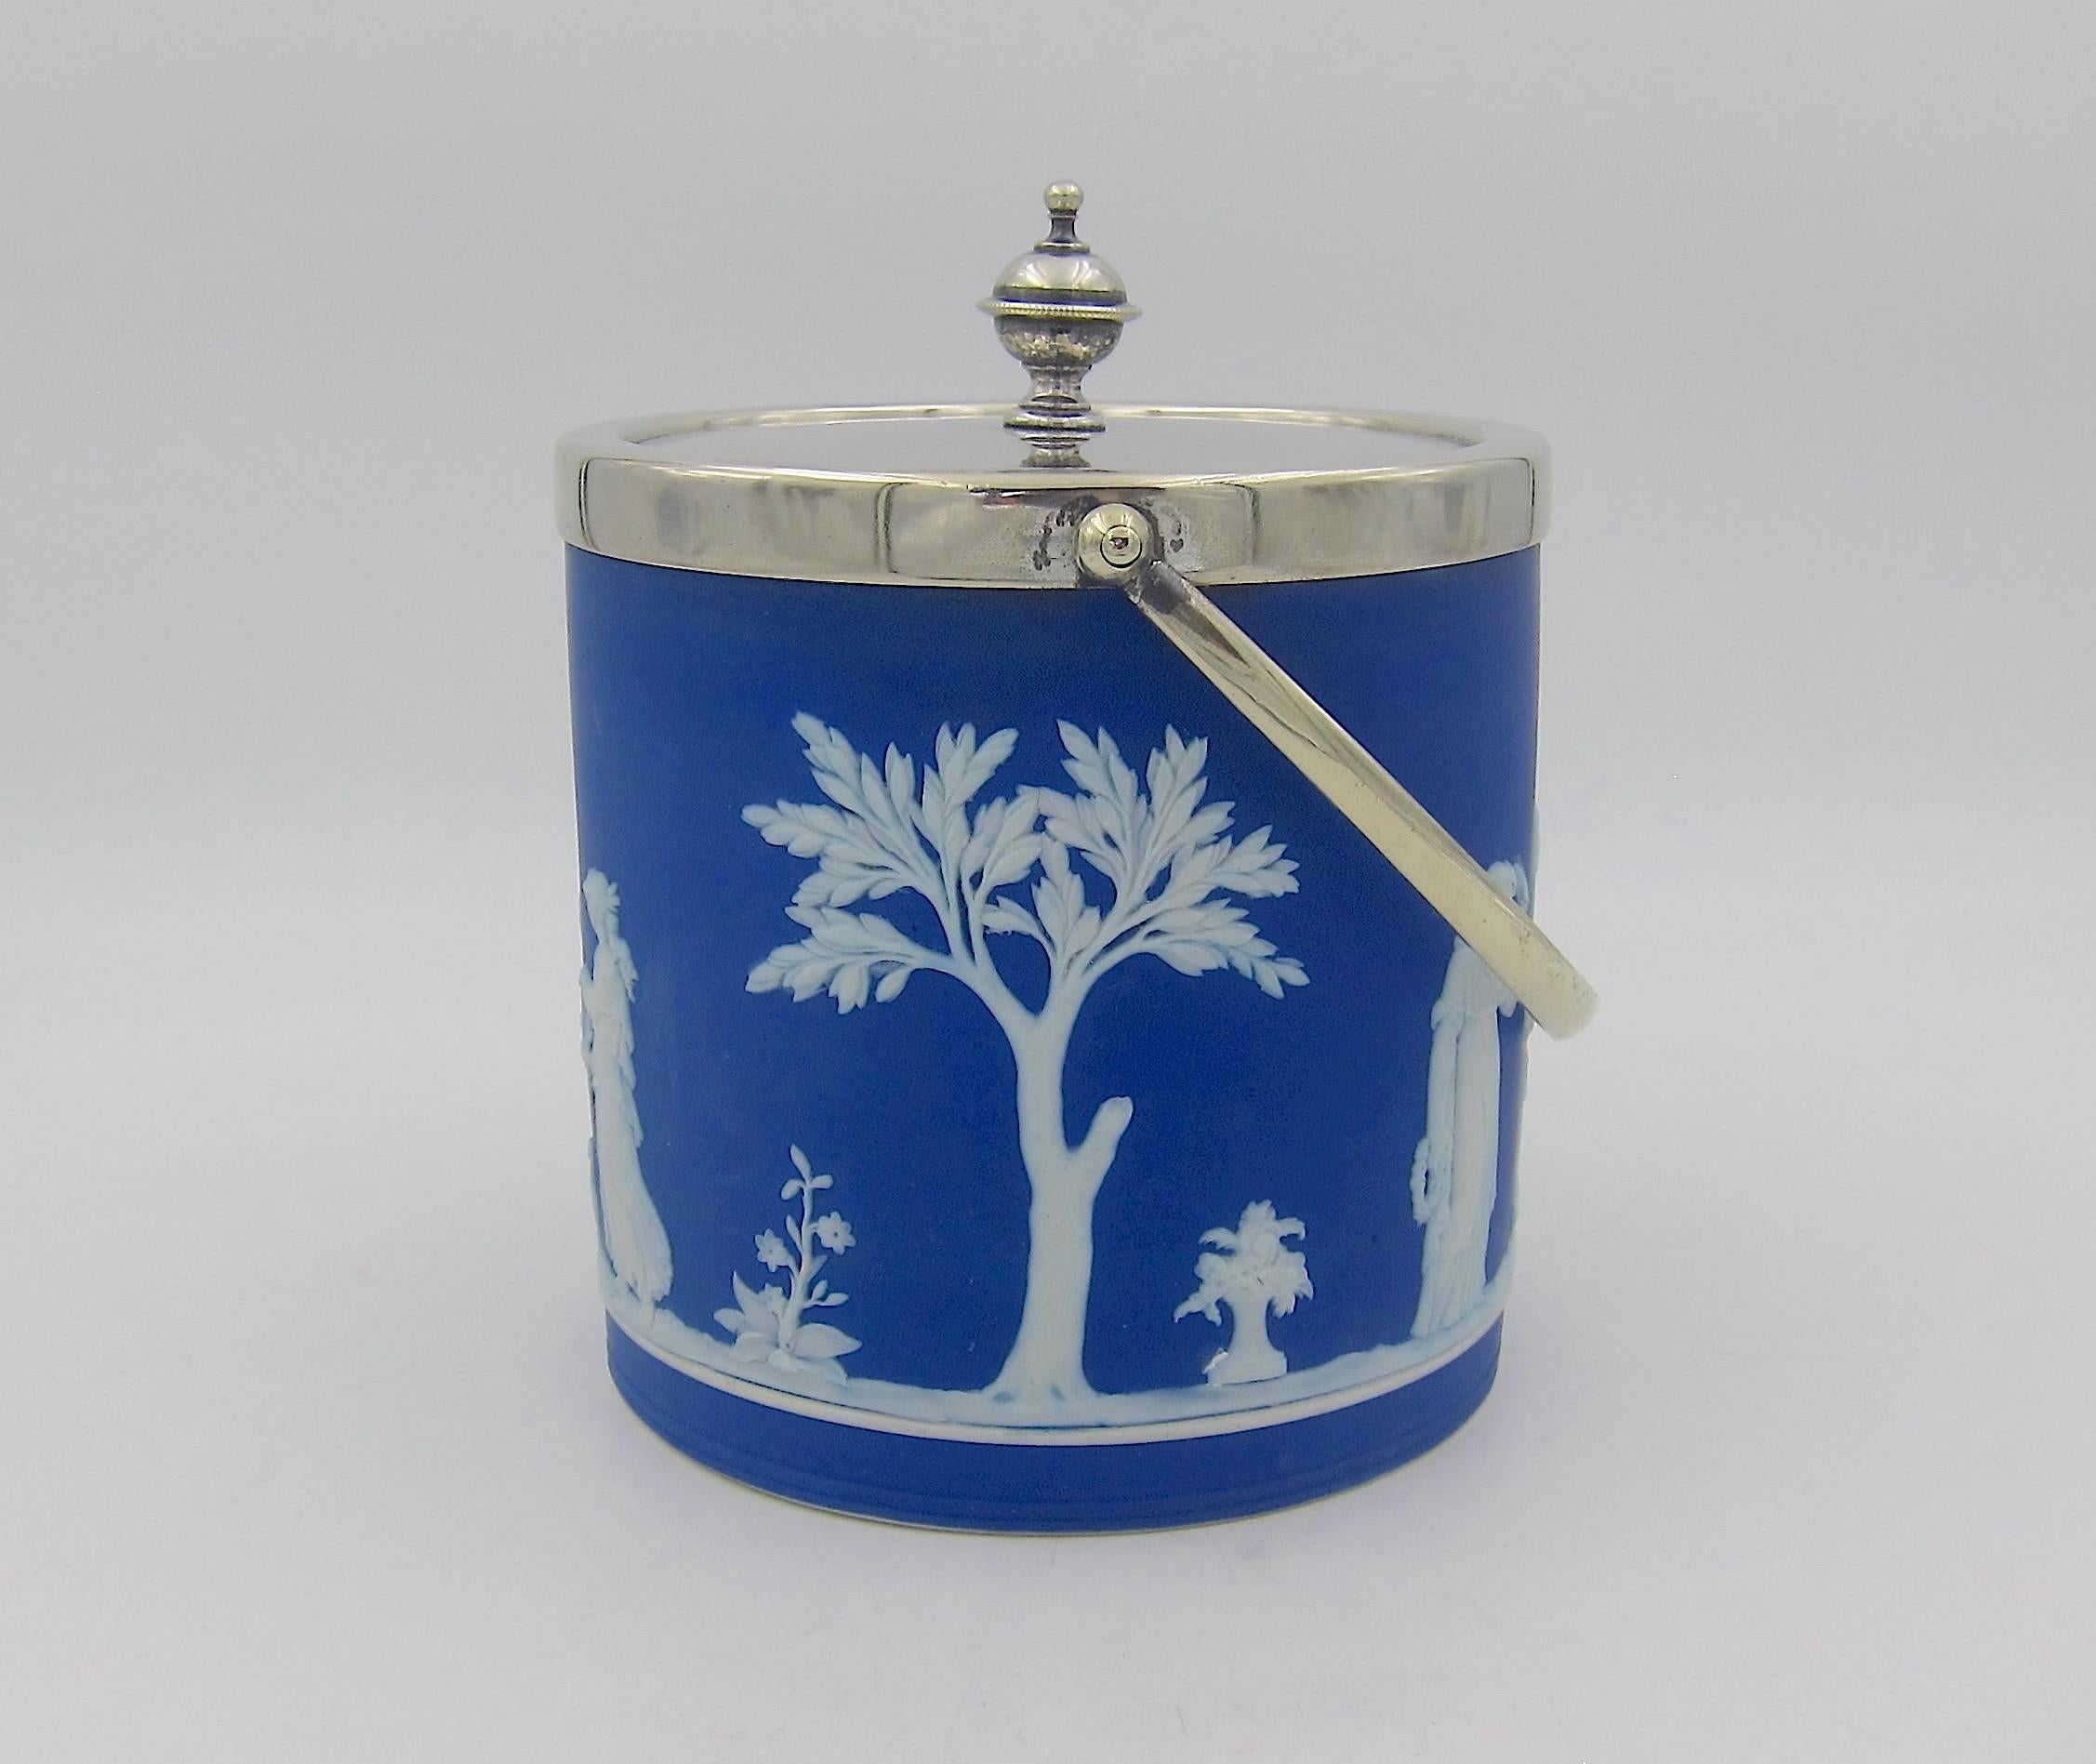 An antique Wedgwood biscuit barrel jar in deep blue jasper ware with white Neoclassical trees and sacrifice figures in relief. The cylindrical-shaped covered jar was made in England during the late Victorian era, circa 1880s to early 1890s. The